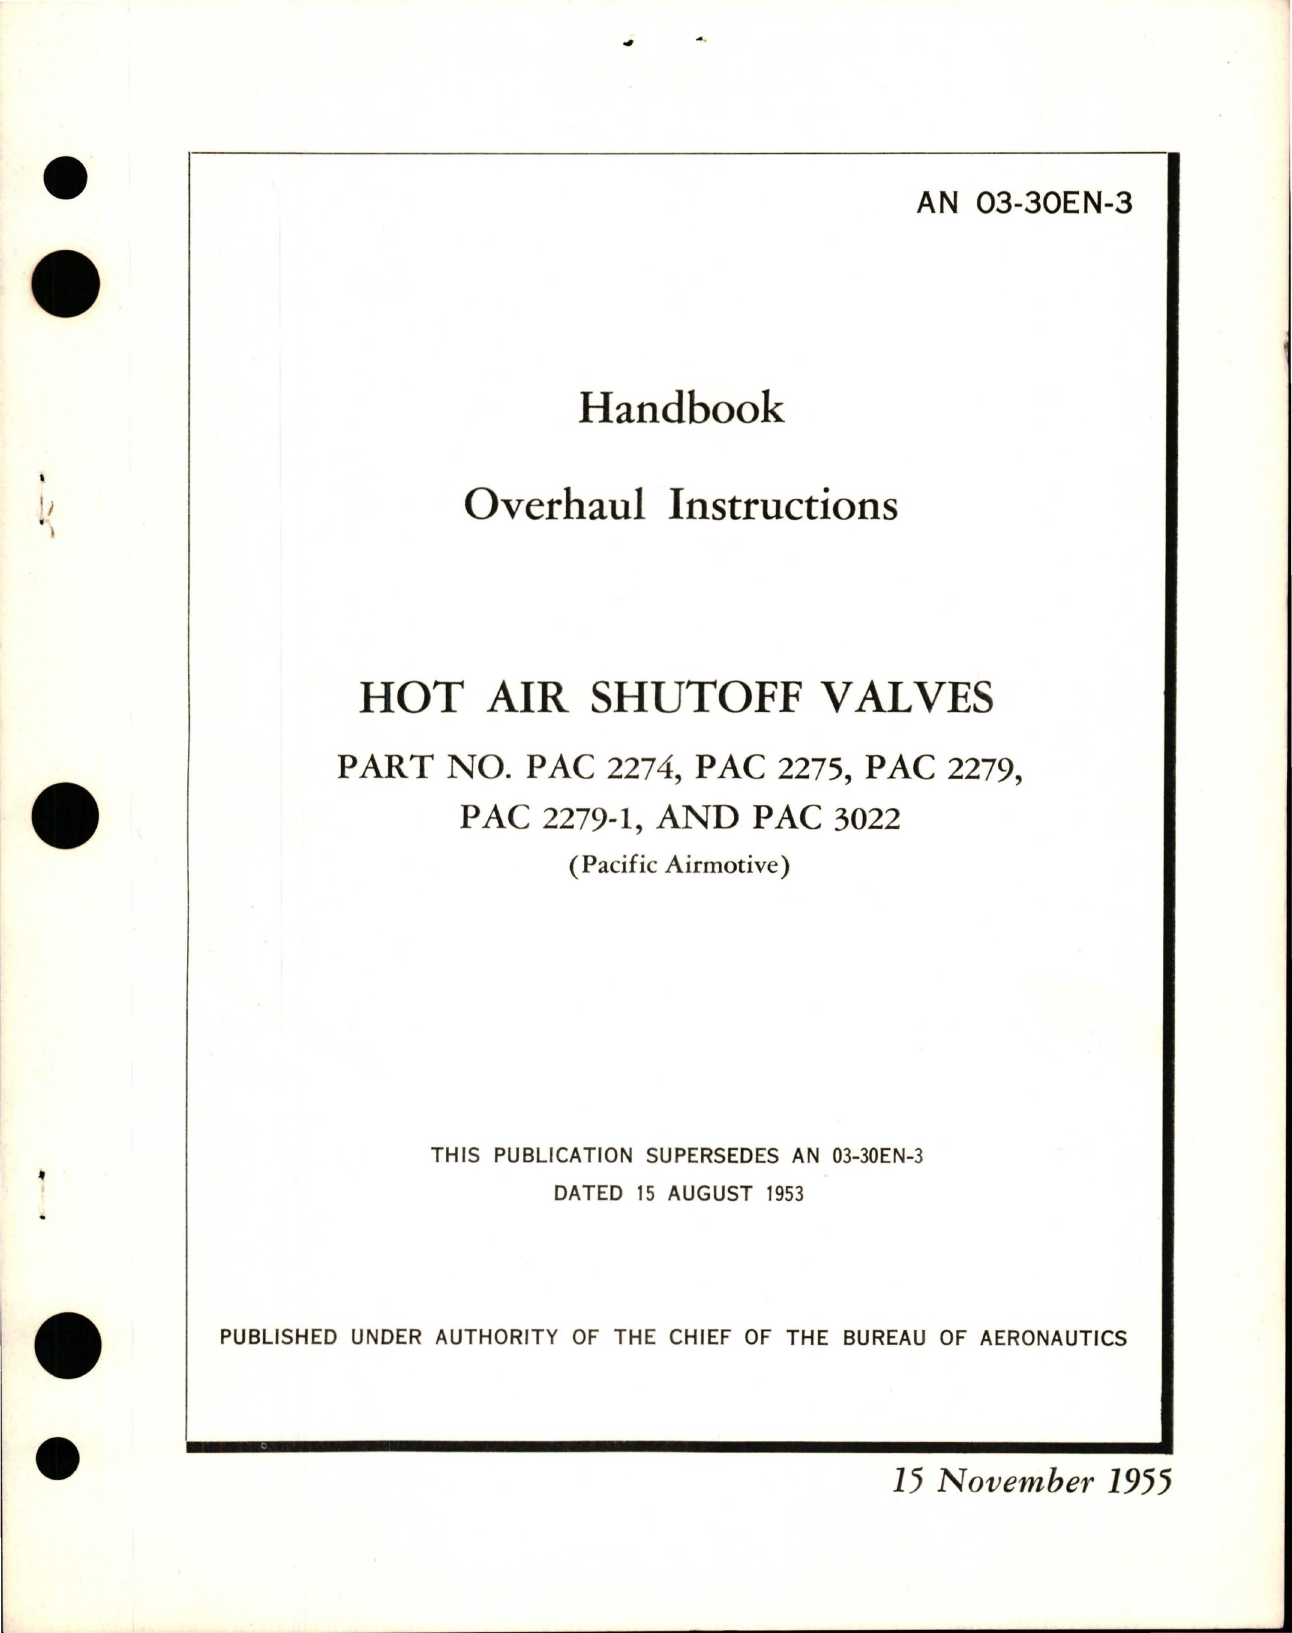 Sample page 1 from AirCorps Library document: Overhaul Instructions for Hot Air Shutoff Valves - Parts PAC 2274, PAC 2275, PAC 2279, PAC 2279-1, and PAC 3022